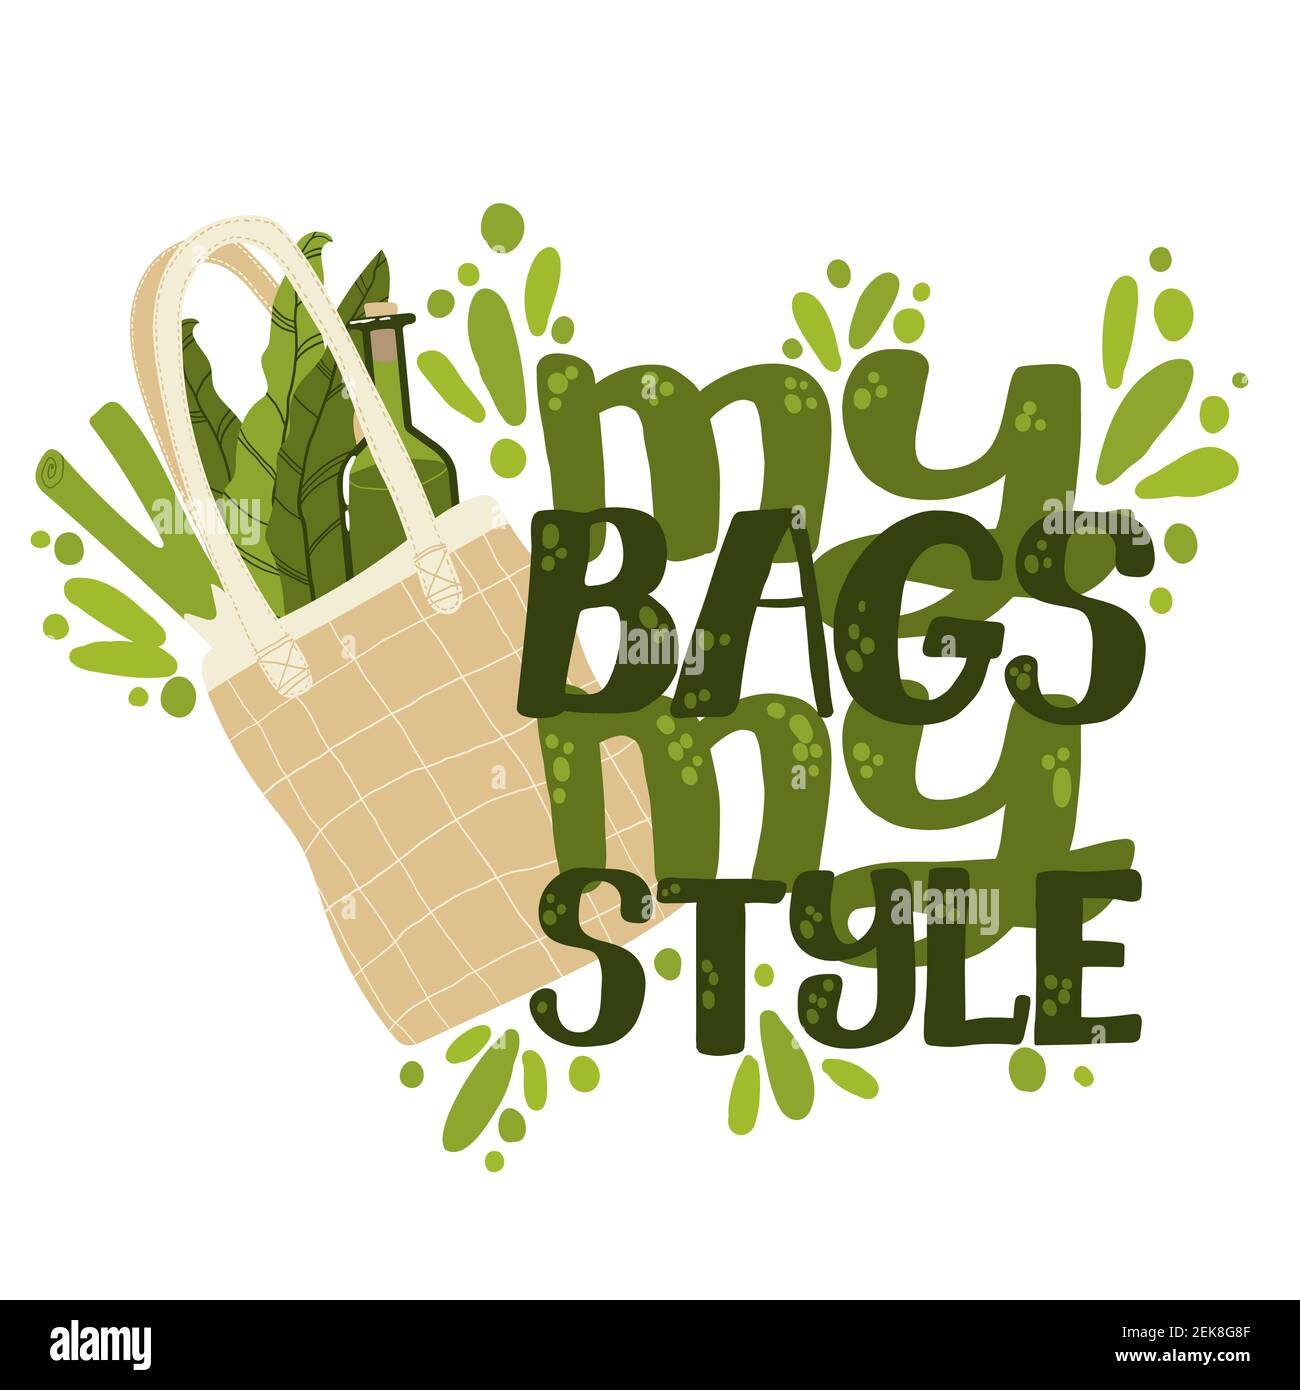 Tote bag Friend - Quotes - Popular themes - Designs